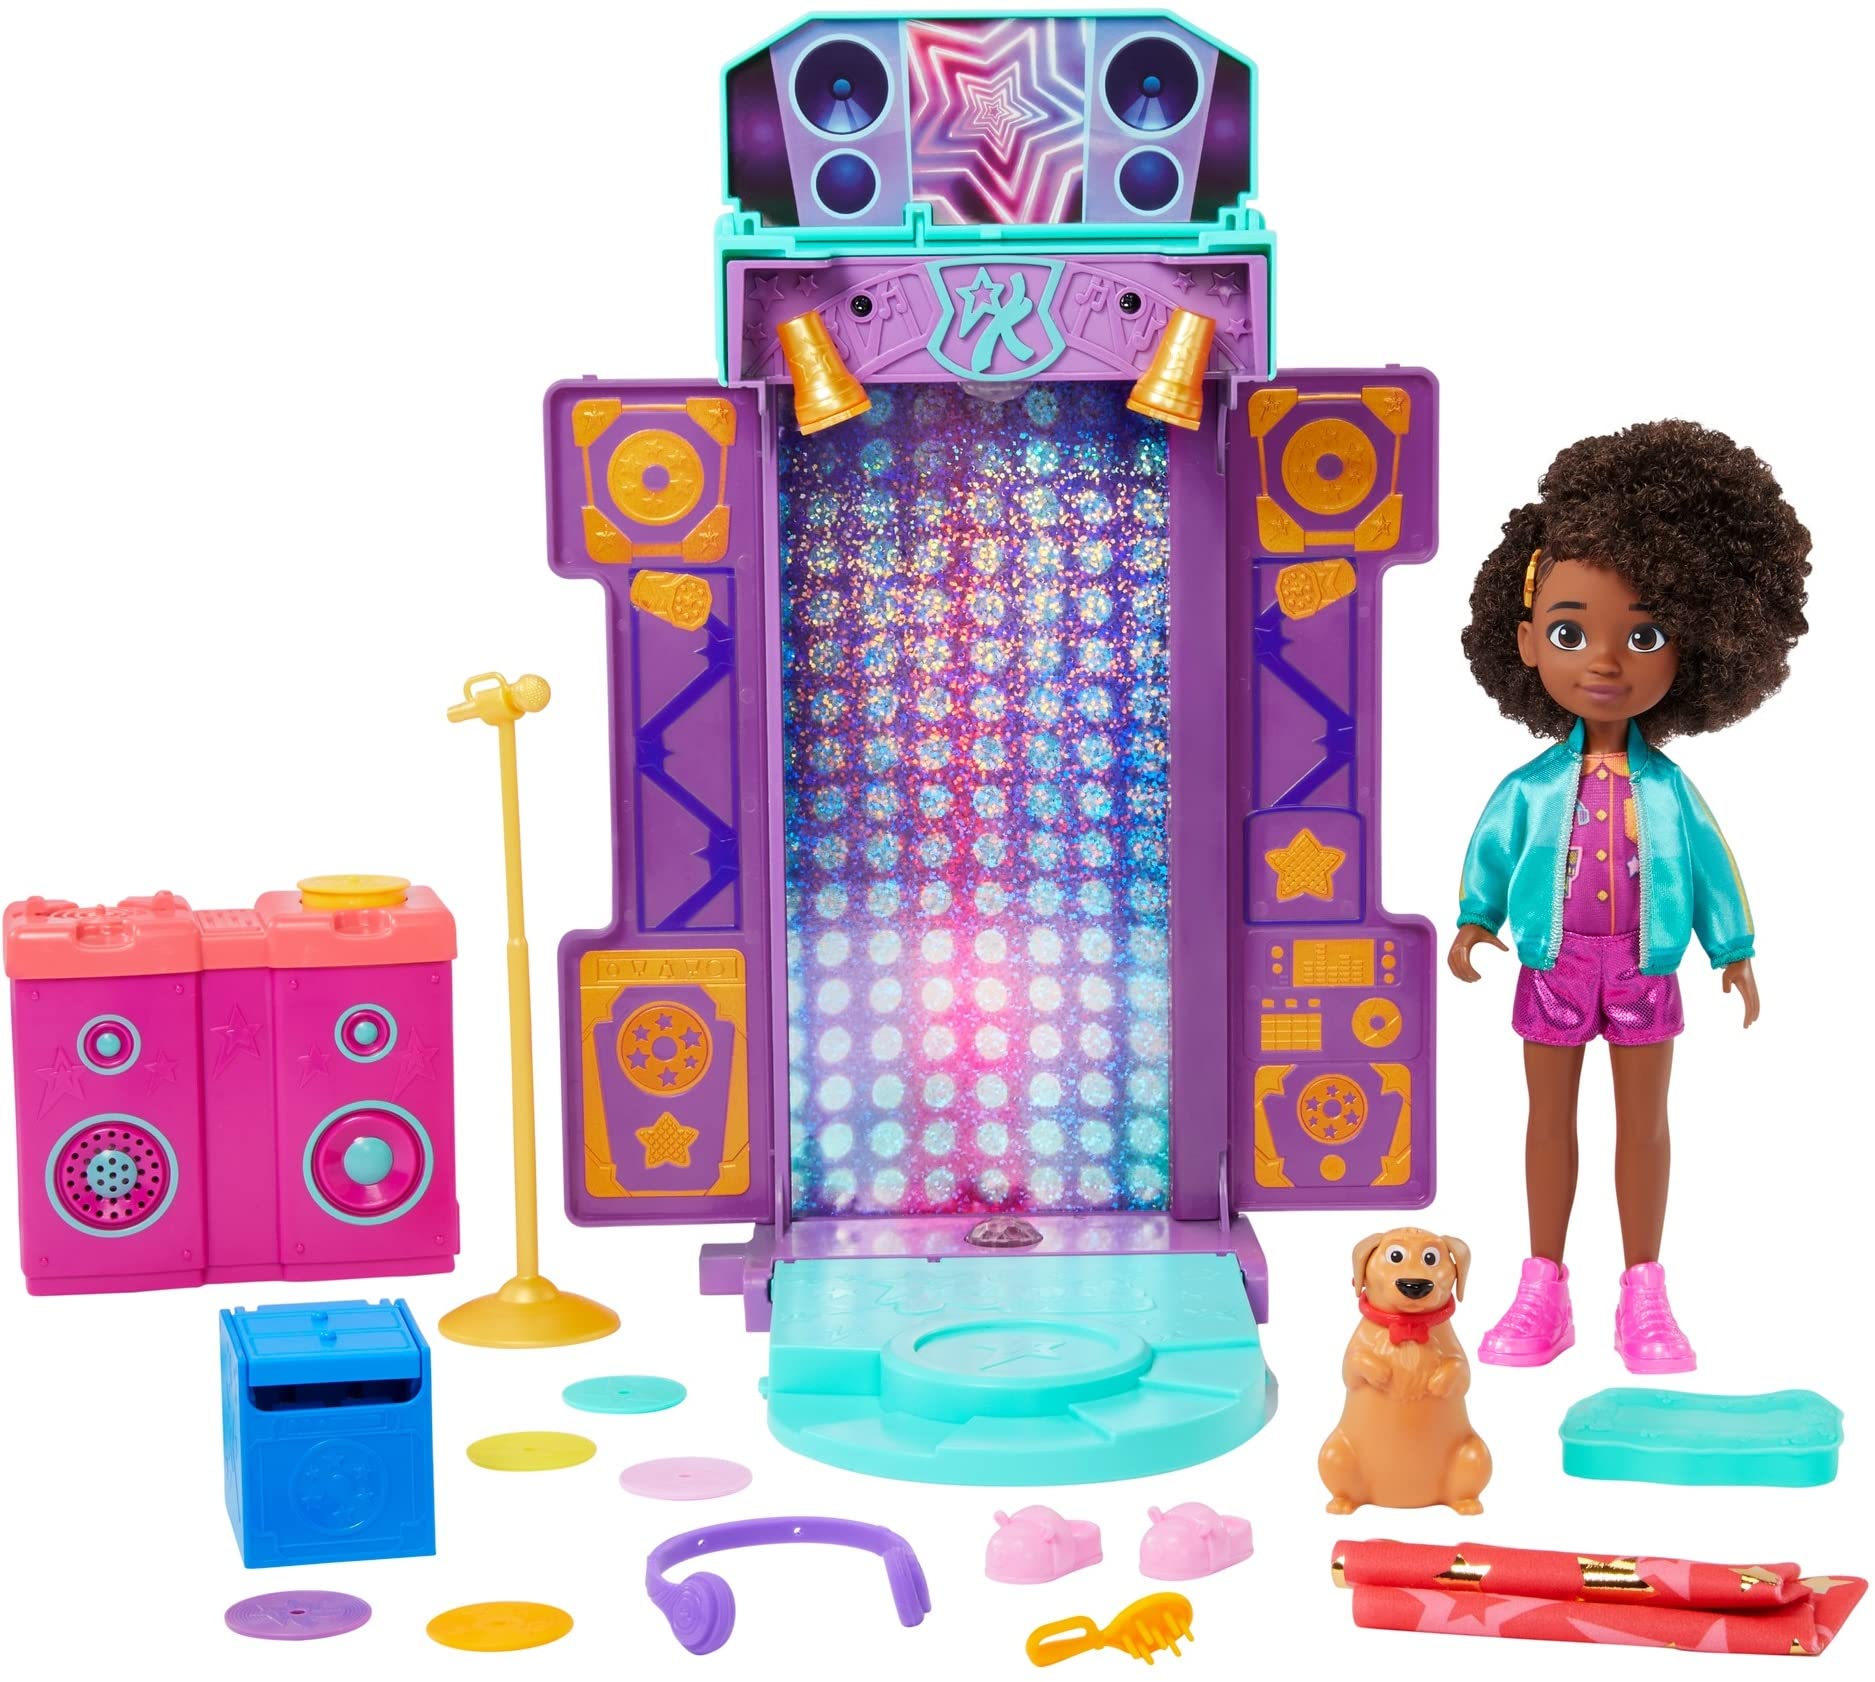 Karma's World Toy Playset w/ Doll & Accessories $15 + Free Shipping w/ Prime or on $25+